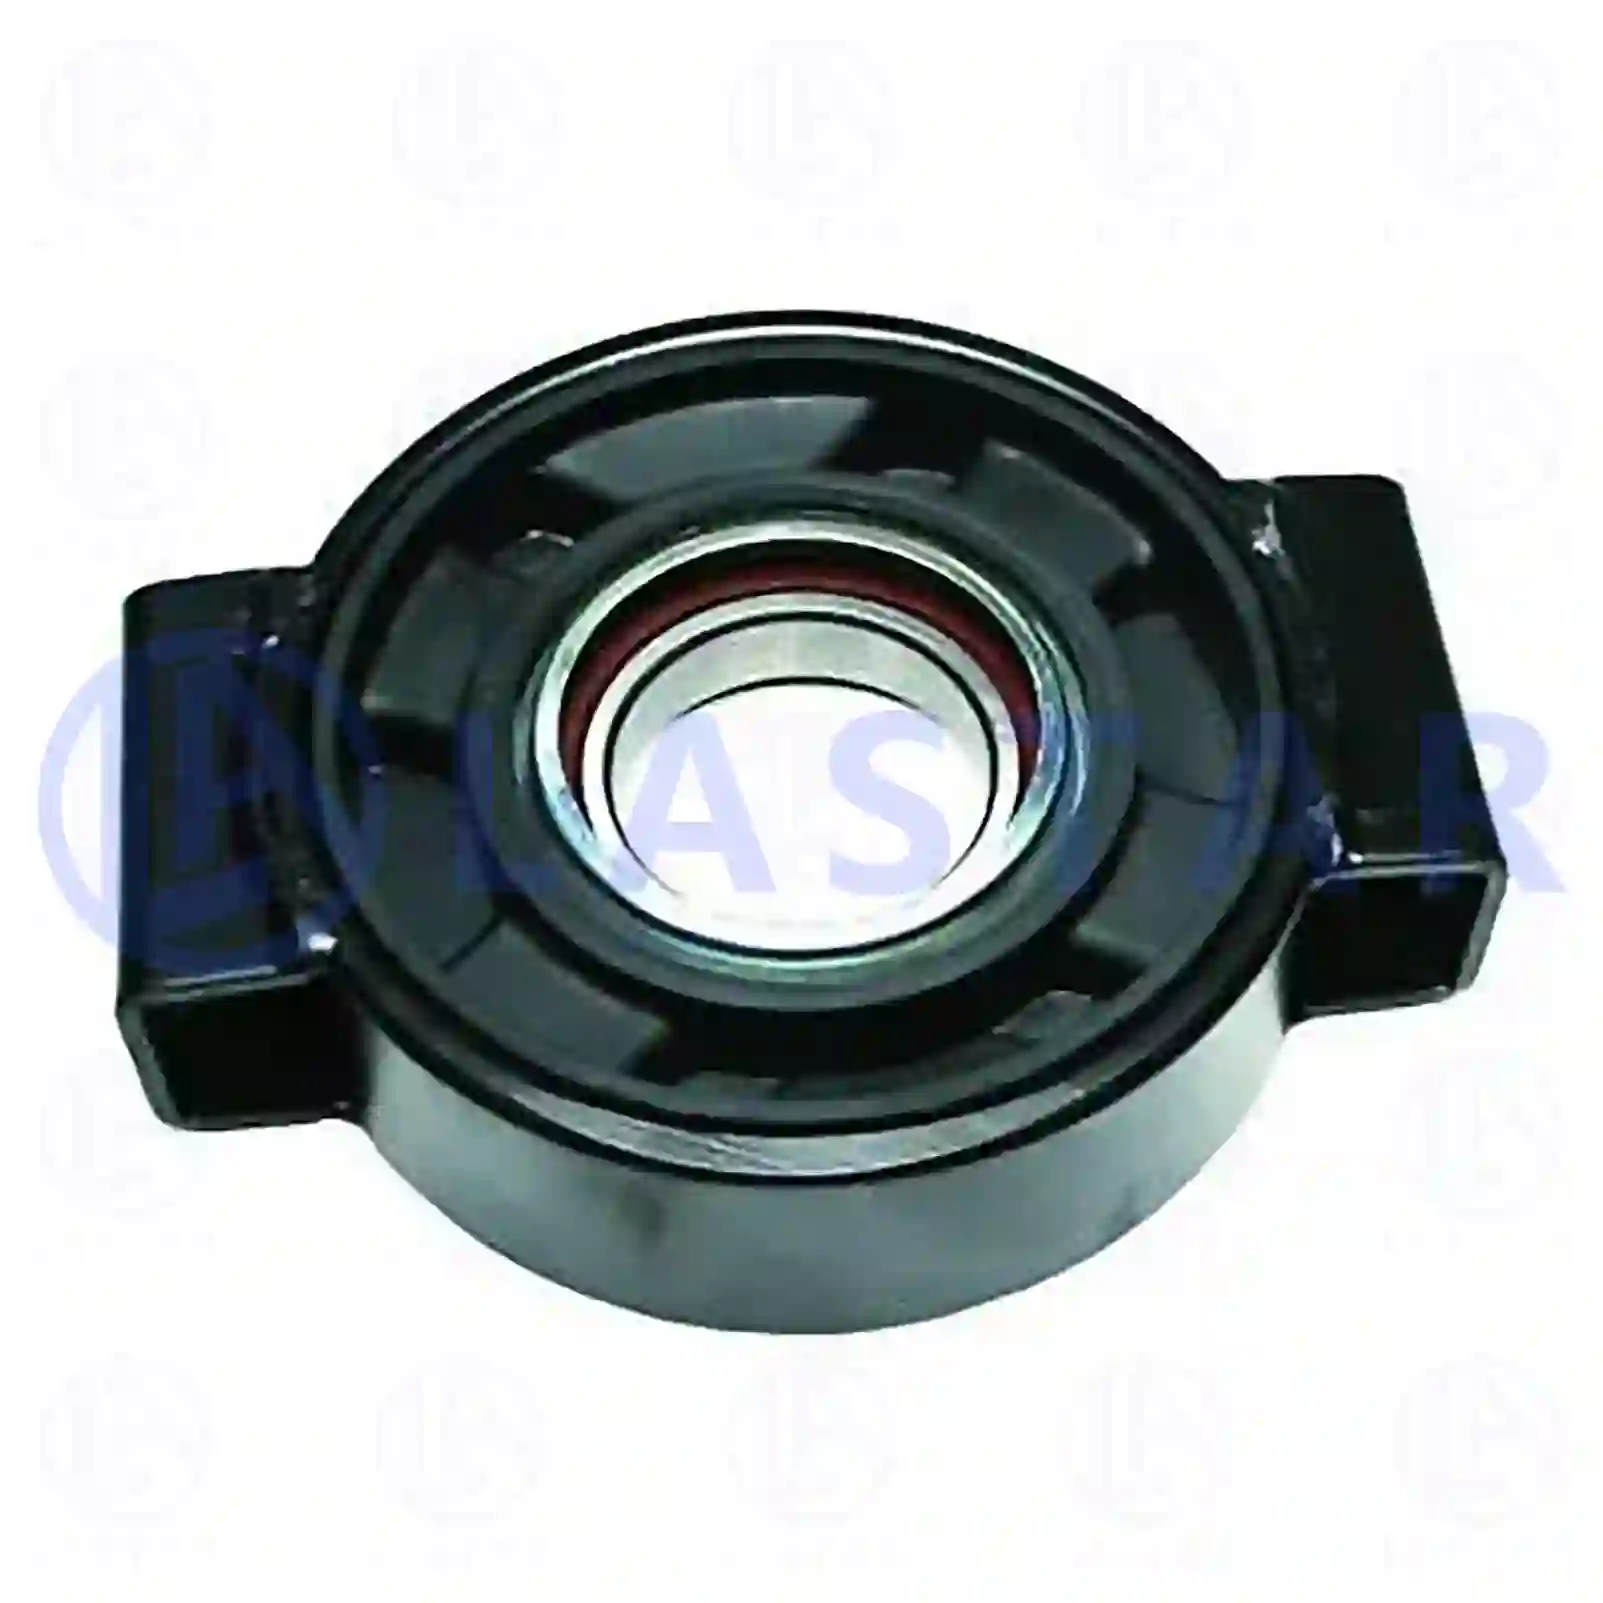 Center bearing, 77734252, 4004100022, 3954100622, 6554100022 ||  77734252 Lastar Spare Part | Truck Spare Parts, Auotomotive Spare Parts Center bearing, 77734252, 4004100022, 3954100622, 6554100022 ||  77734252 Lastar Spare Part | Truck Spare Parts, Auotomotive Spare Parts